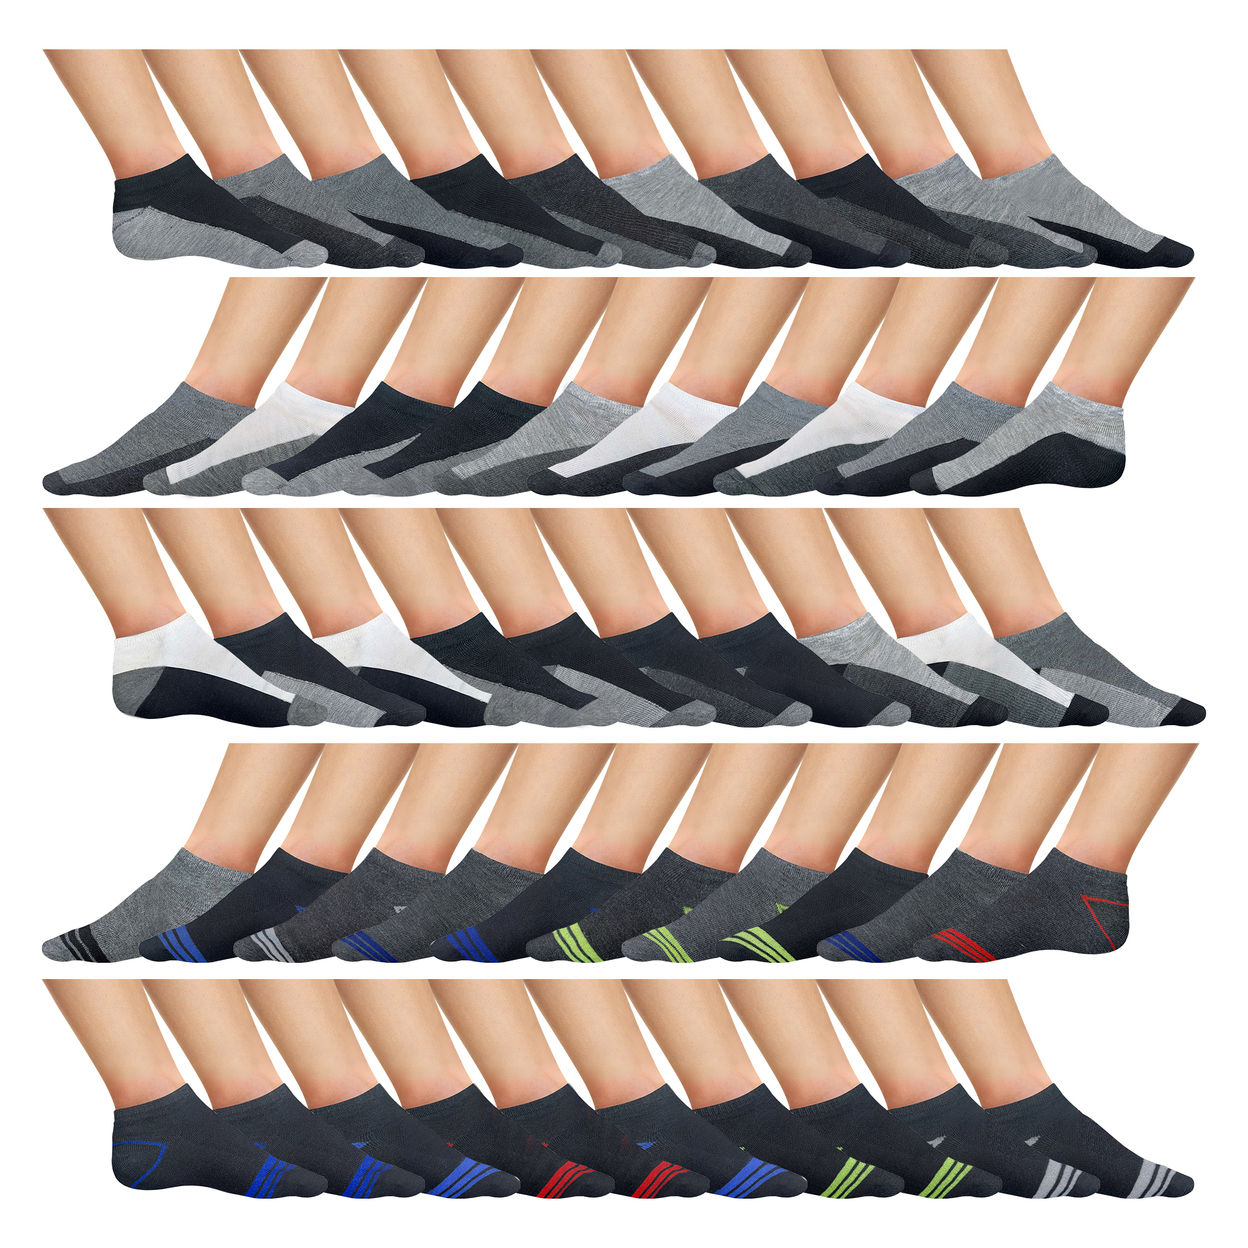 Multi-Pairs: Men's Moisture Wicking Performance Mesh Running Active Low-Cut Athletic Ankle Socks - 40-pairs